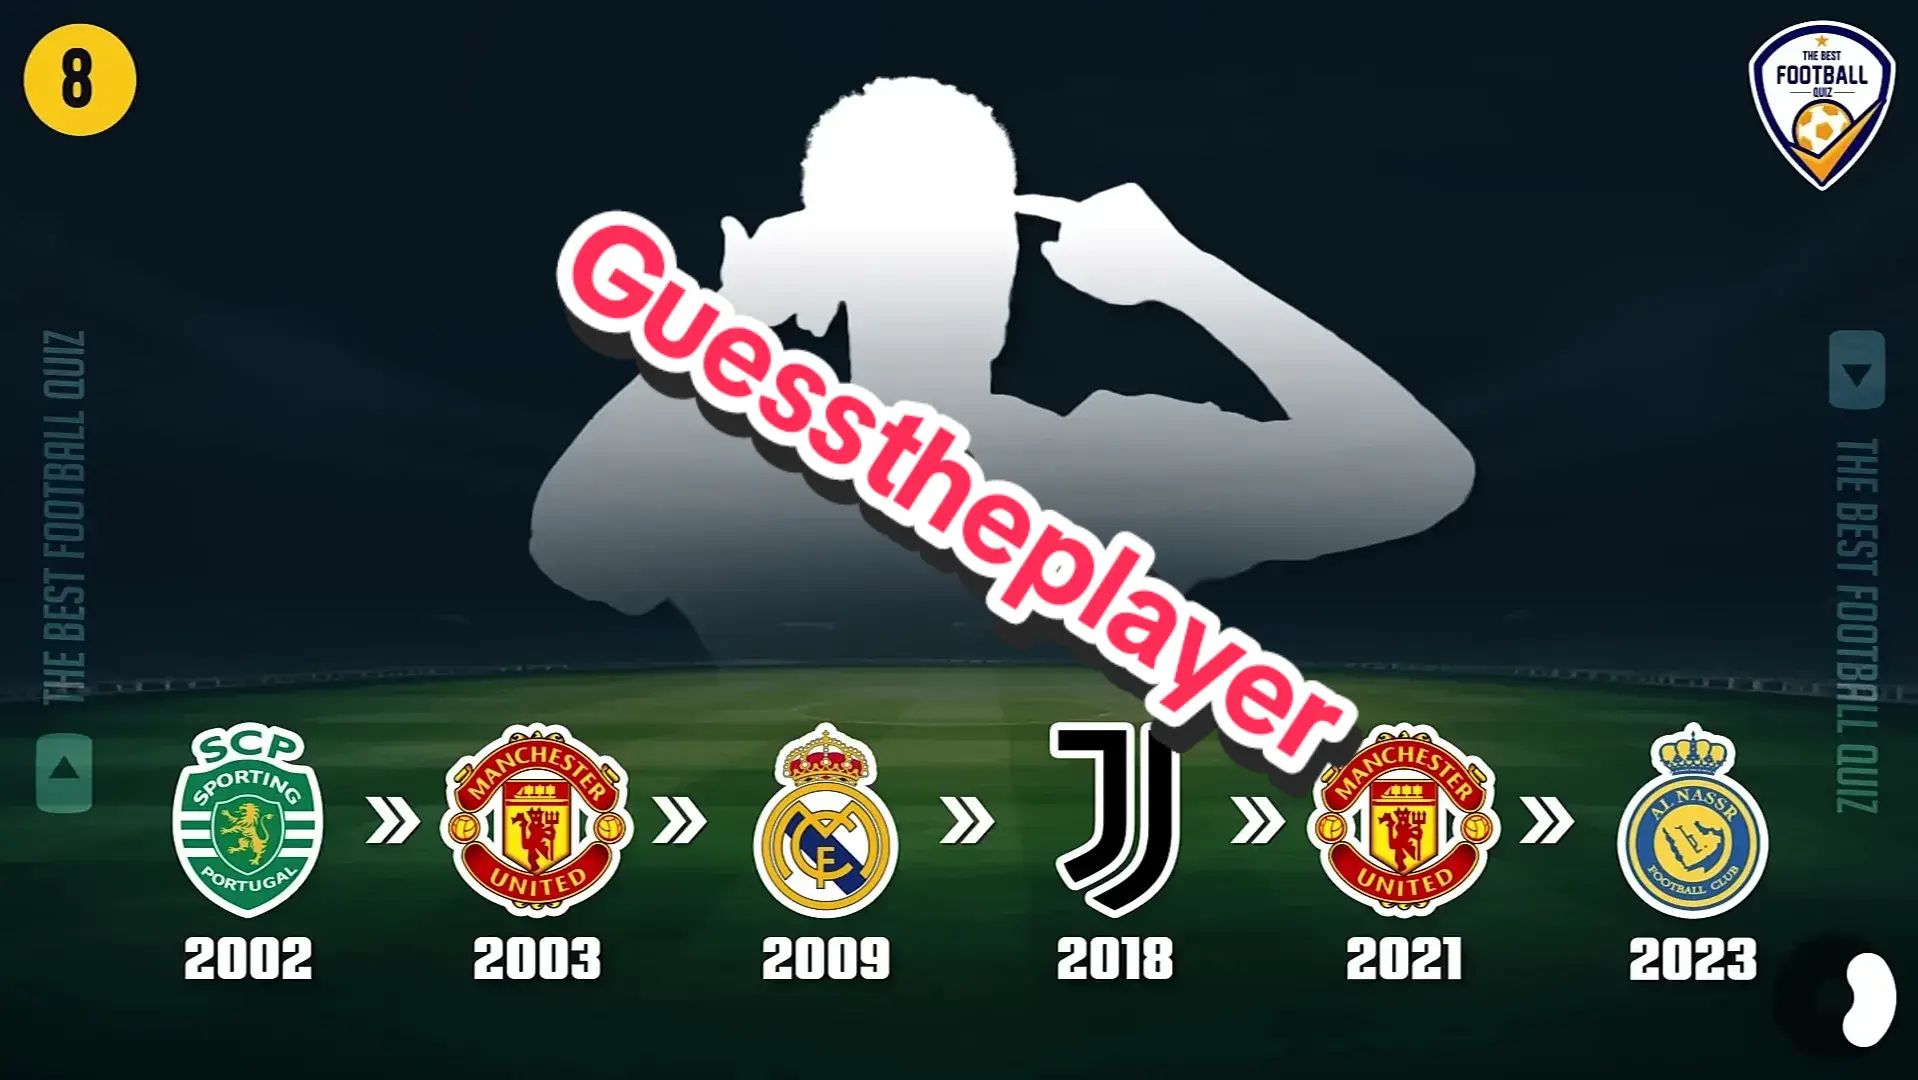 Guess the Player !! Next part?  #football #foryou #quiz #guesstheplayer #transfer #global #viral 